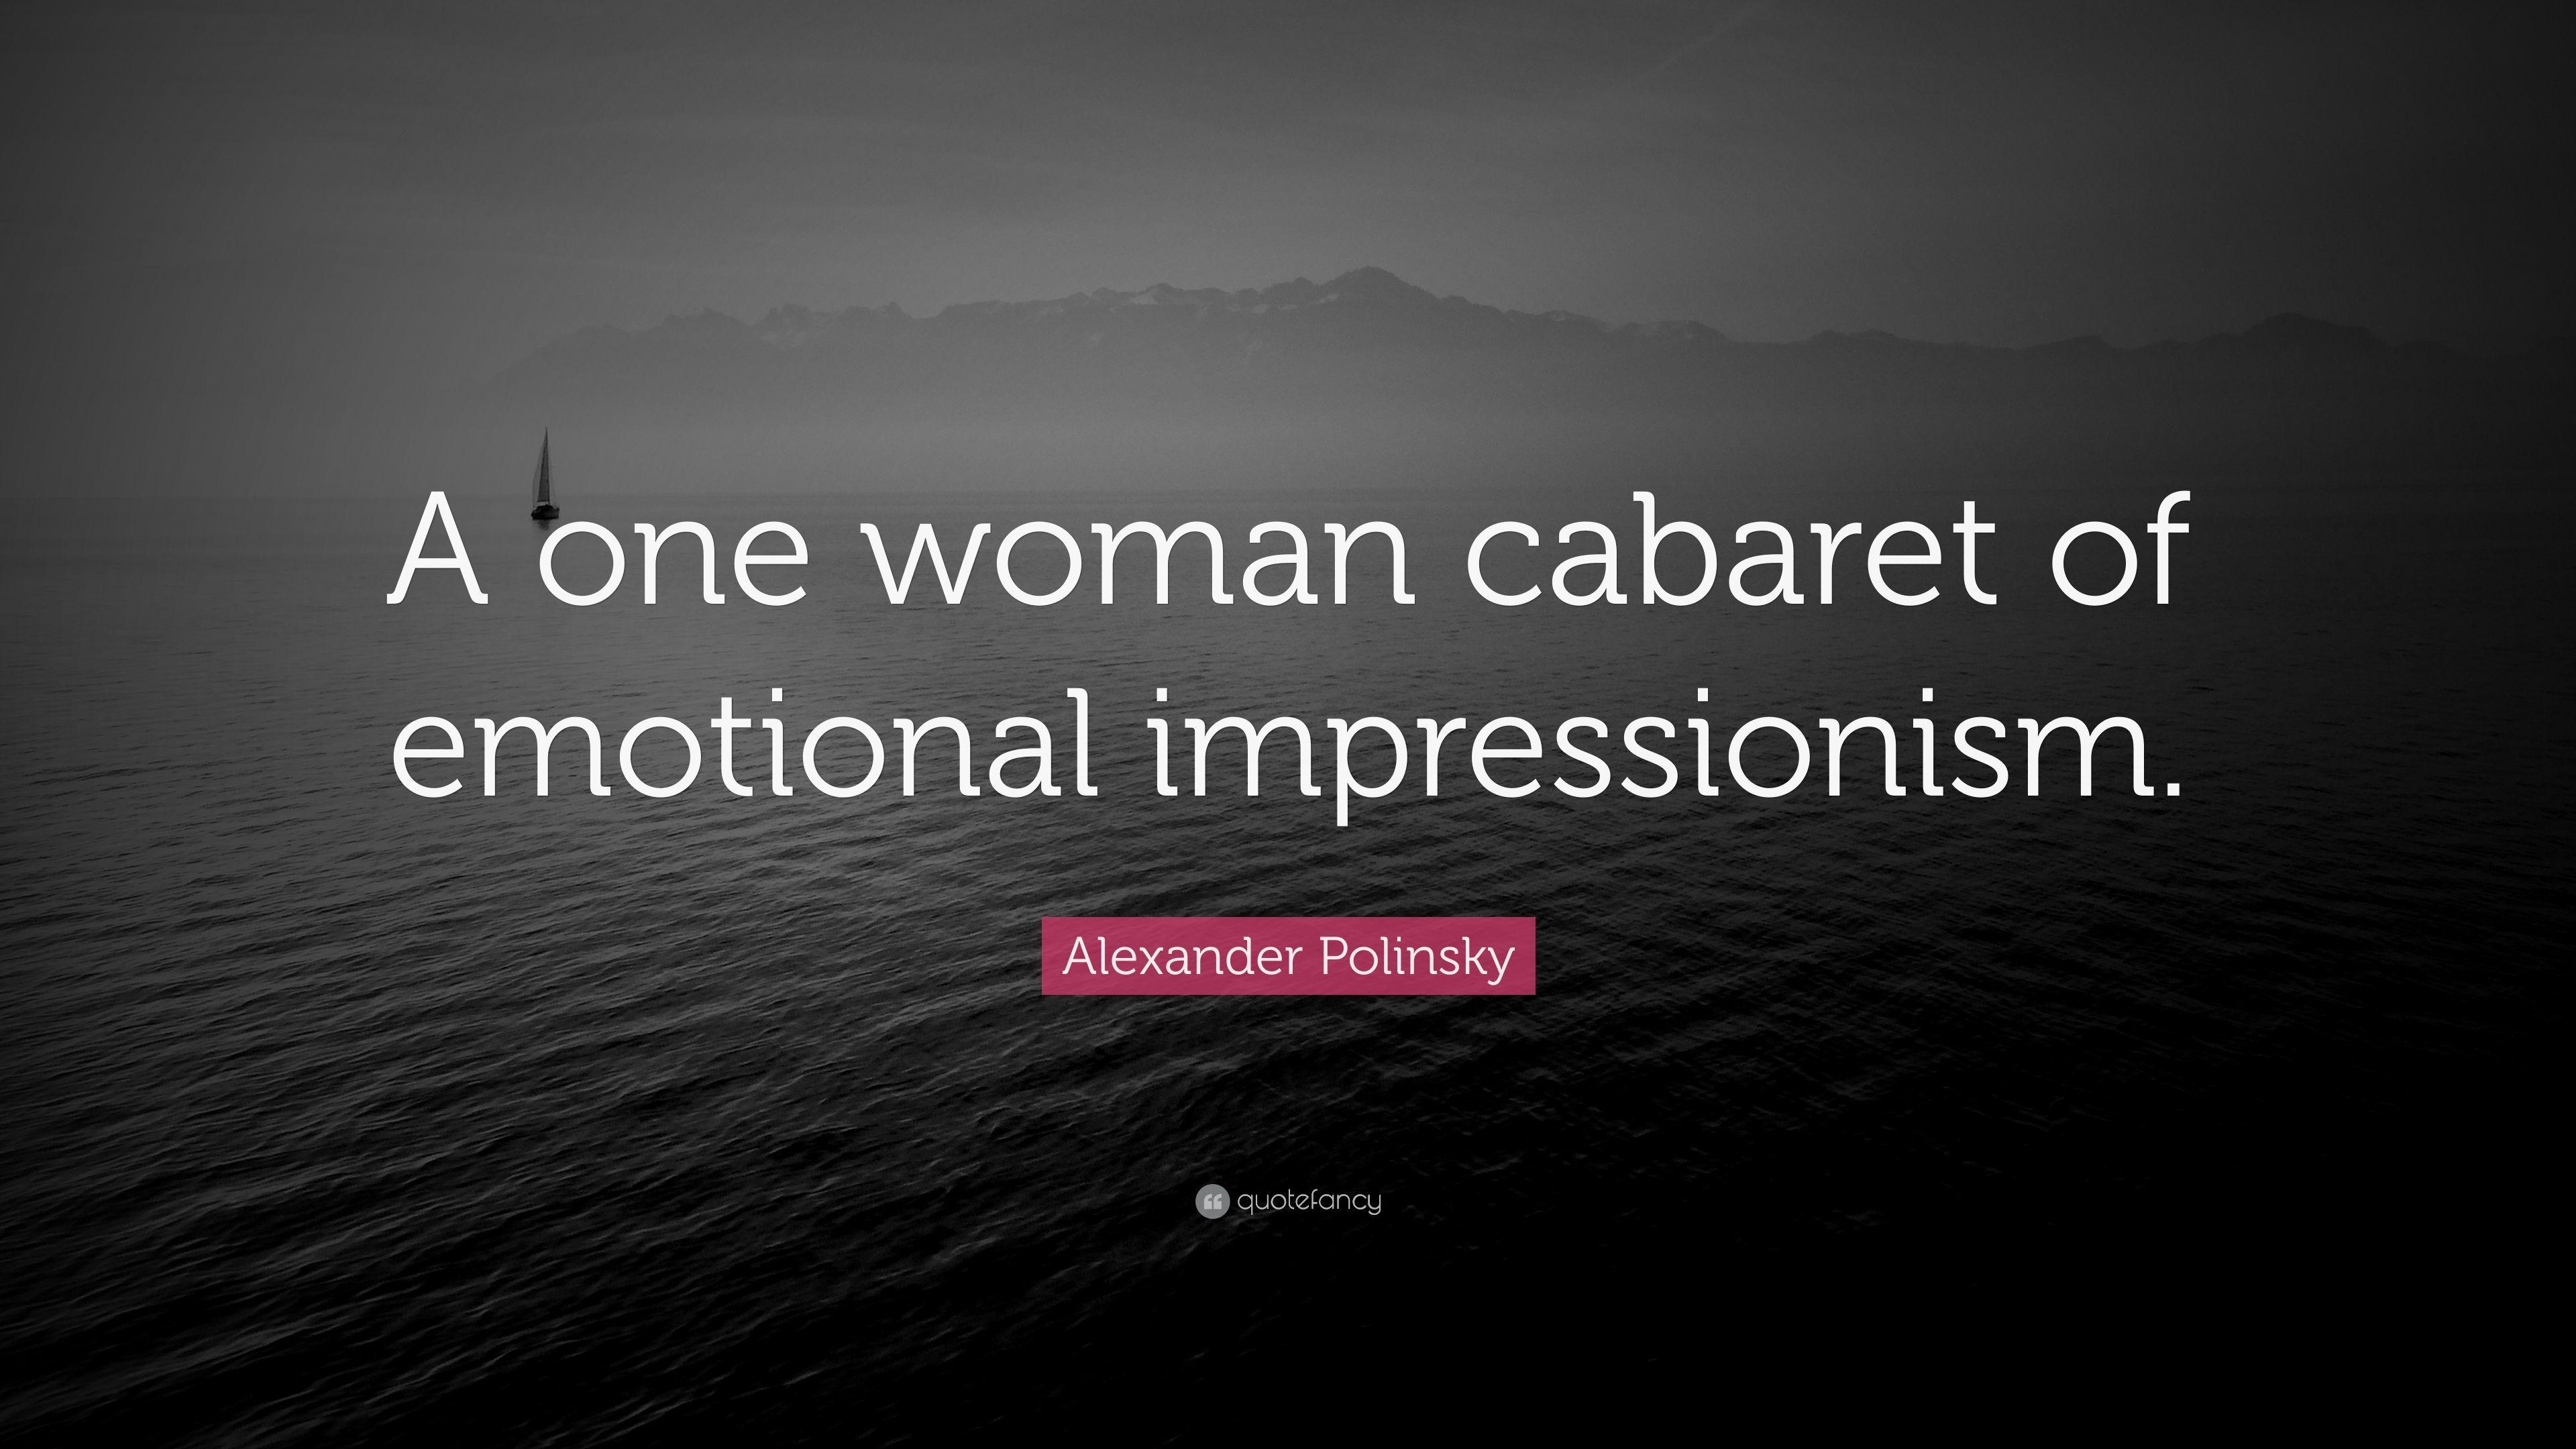 Alexander Polinsky Quote: “A one woman cabaret of emotional